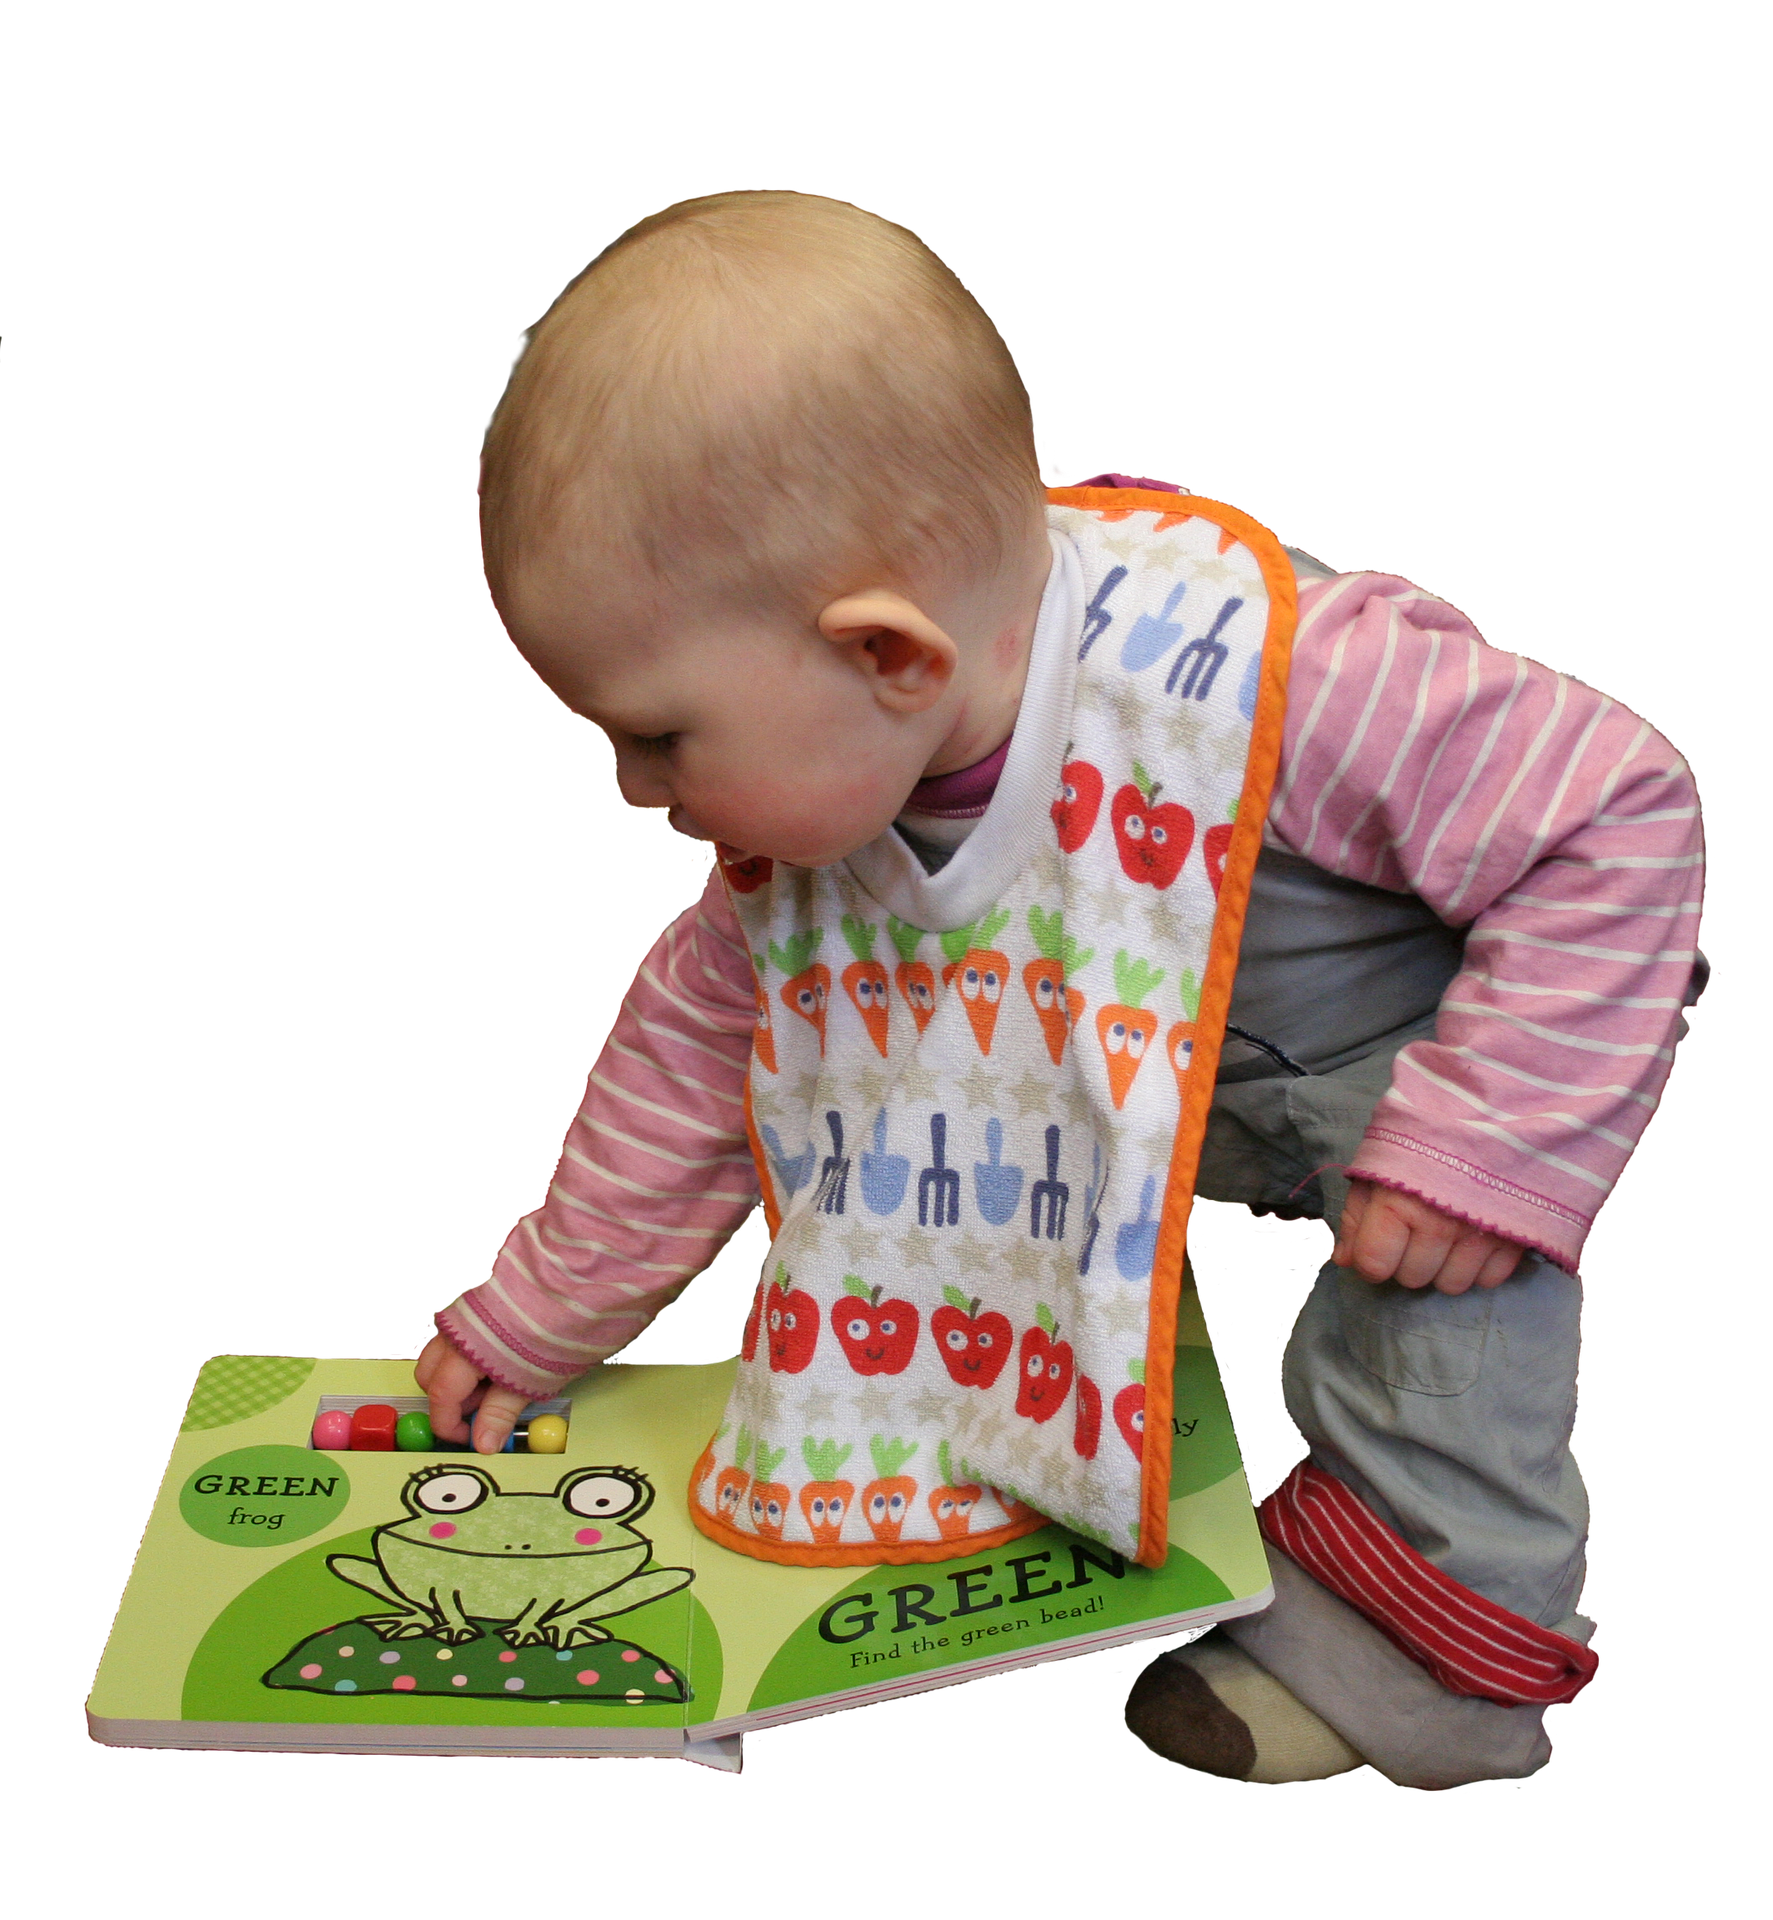 Image of baby in a pink top, gray pants, and orange bib leaning over and looking at a green book.